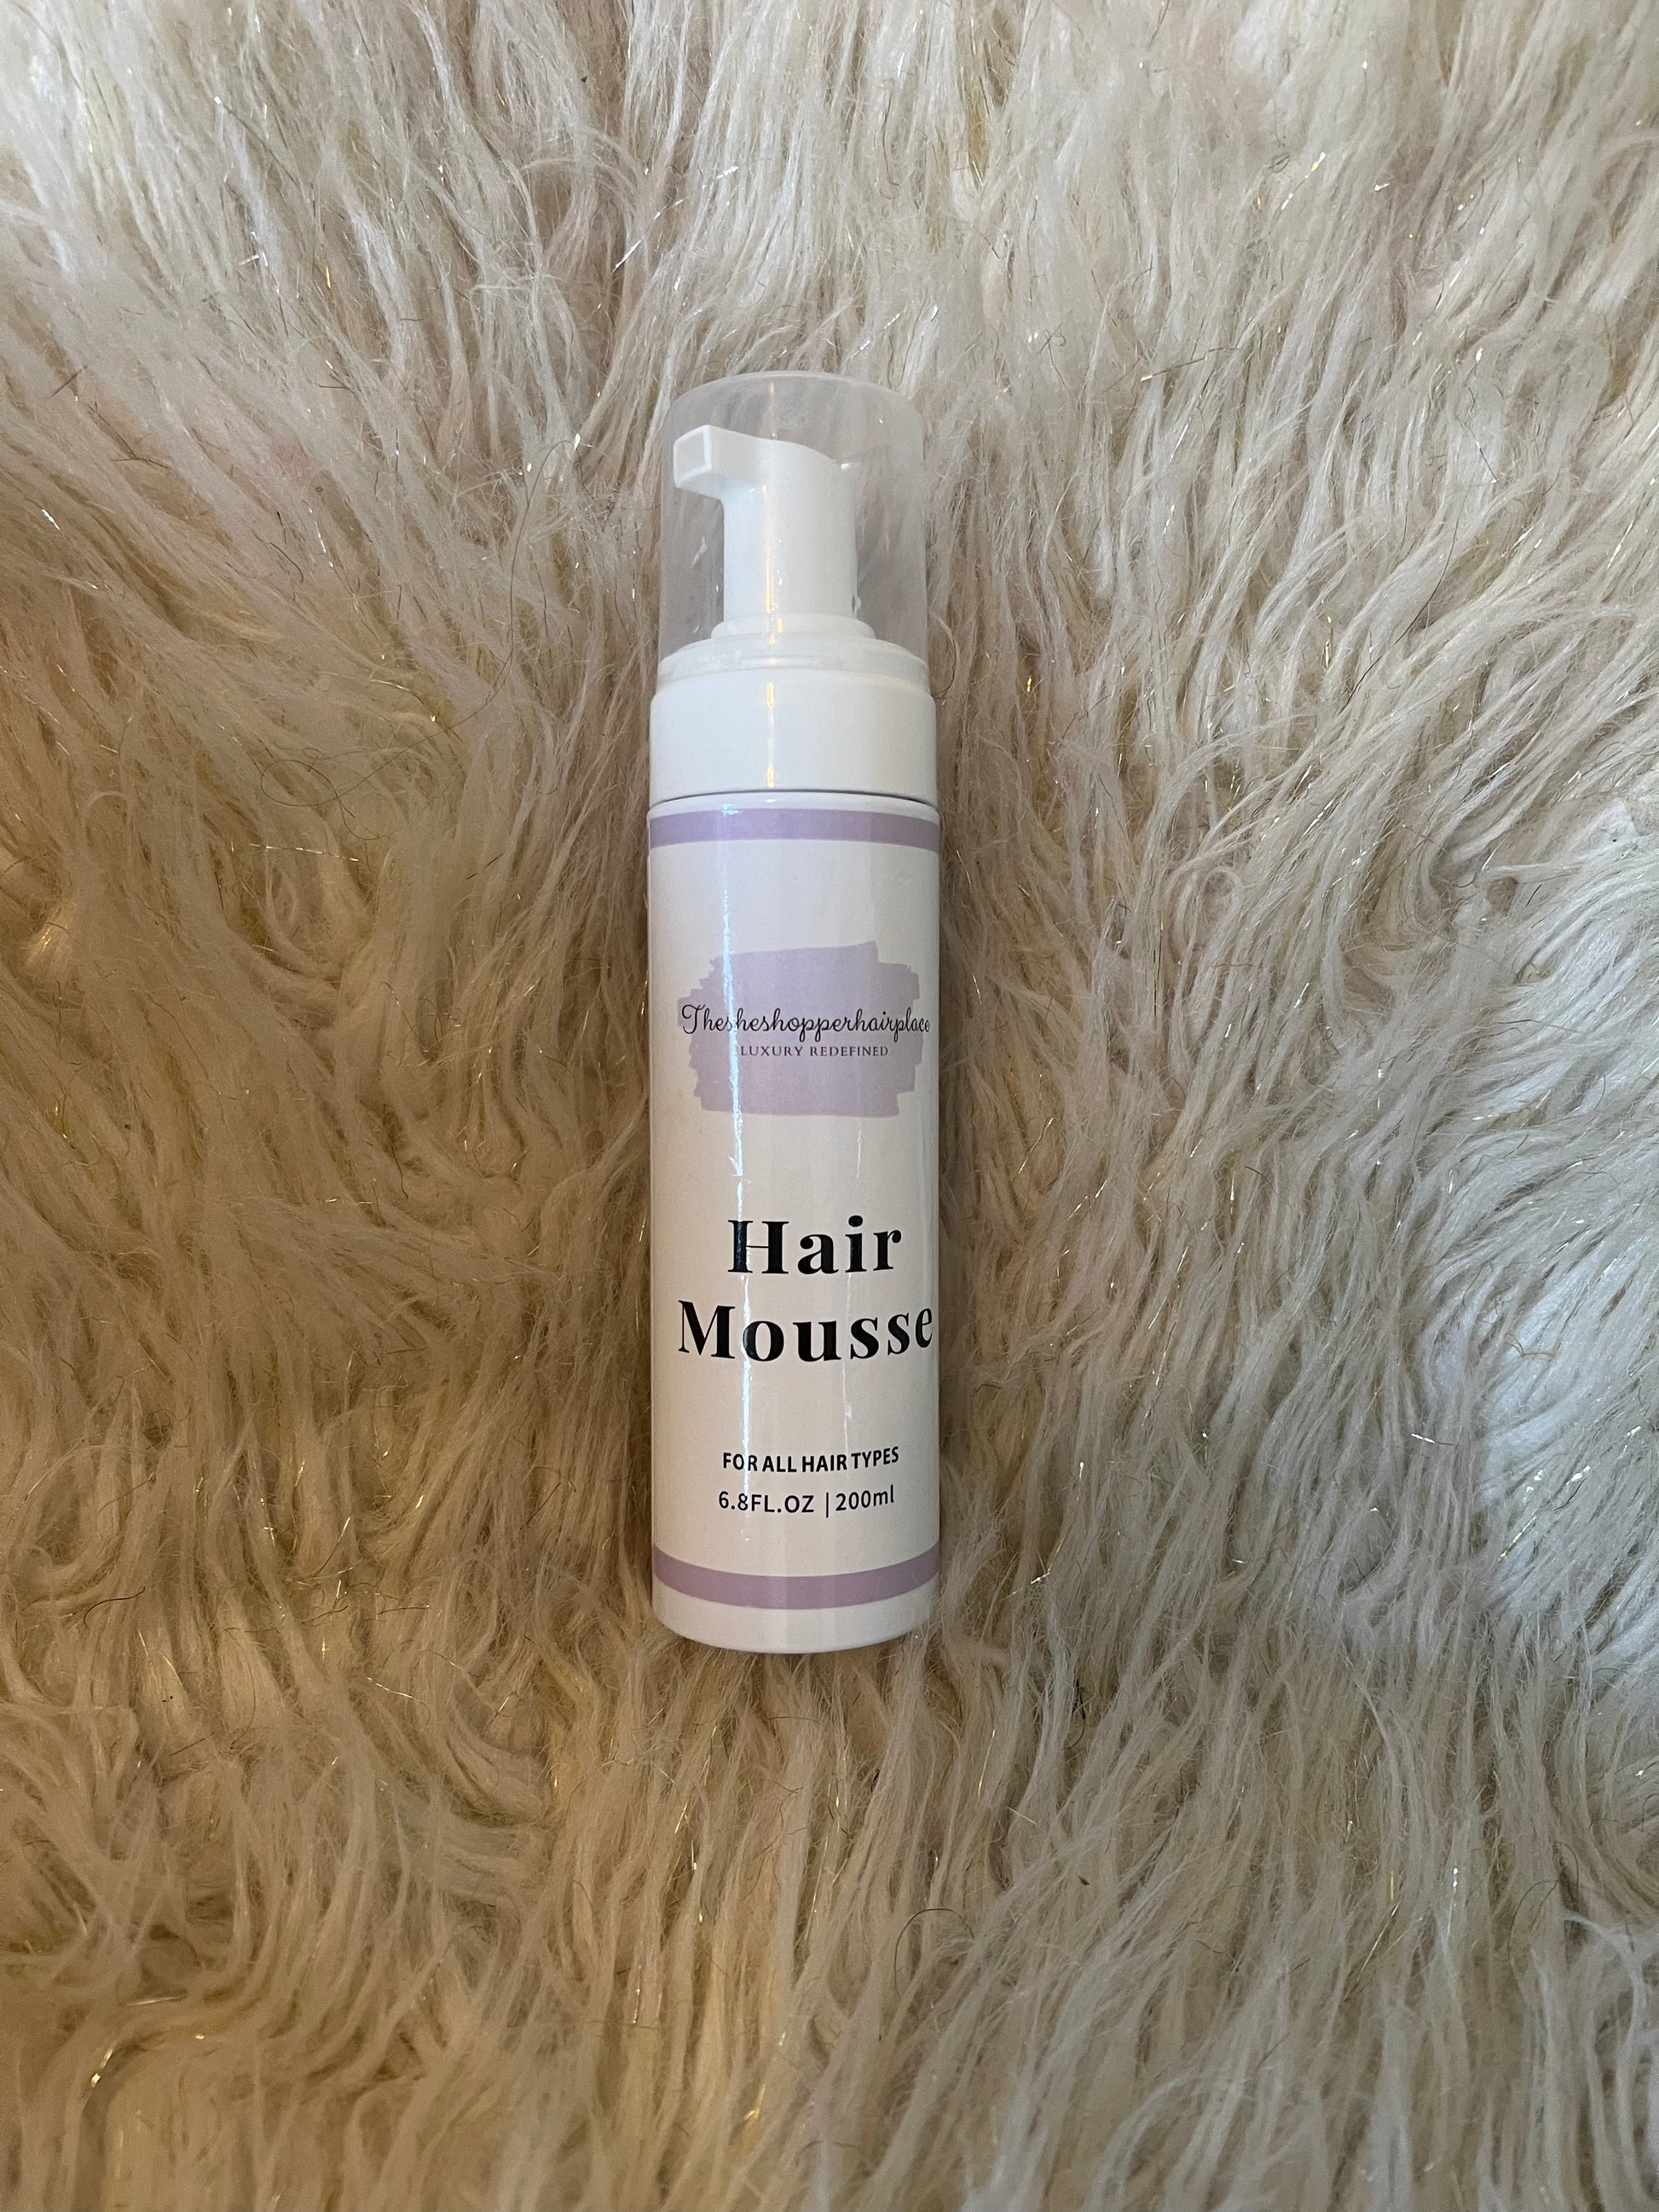 Hair mousse and braids Revive foam - sheshopperhairplace LLC